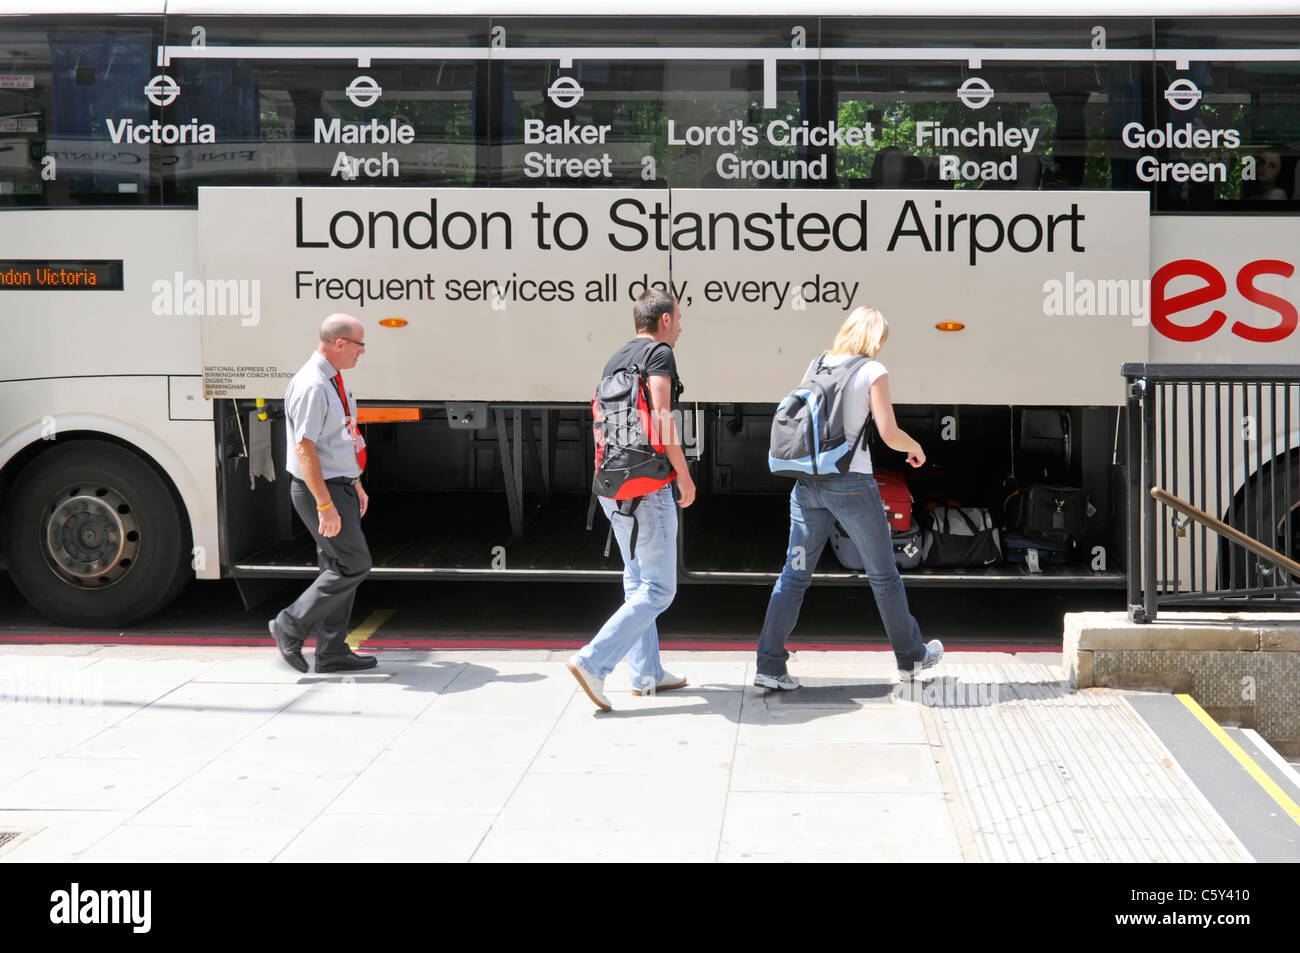 National Express public transport coach driver supervises passengers collecting luggage suitcases arrival at London from Stansted airport England UK Stock Photo